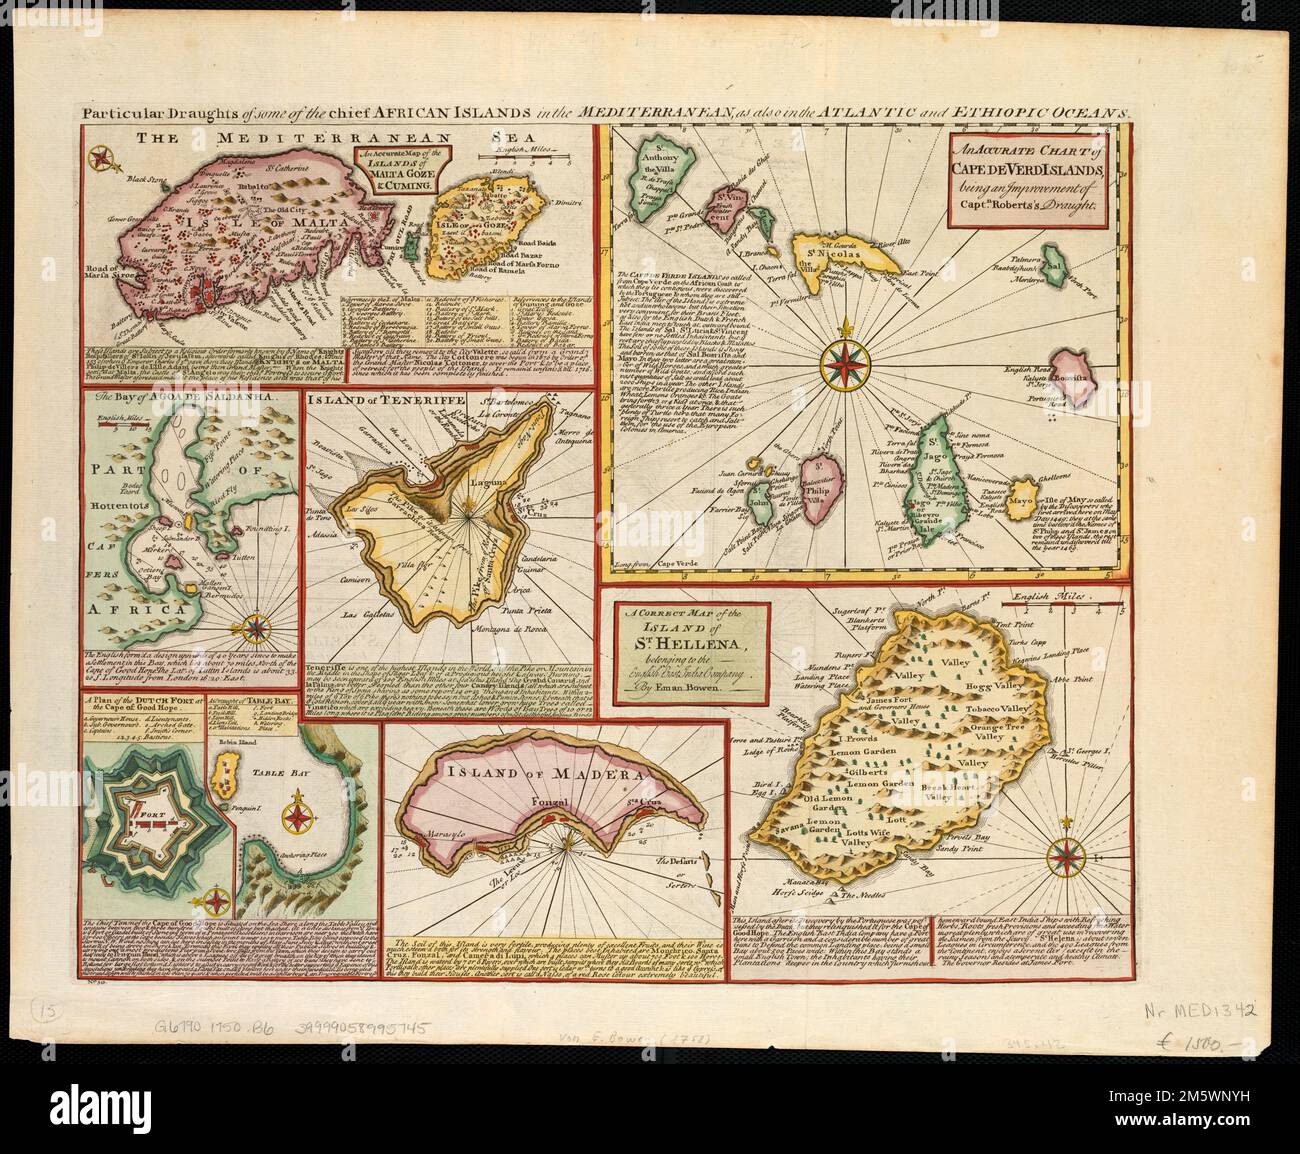 Particular draughts of some of the chief African Islands in the Mediterranean : as also in the Atlantic and Ethiopic Oceans. Maps: 'An accurate map of the islands of Malta Goze & Cuming' ; 'An accurate chart of Cape de Verd Islands, being an improvement of Capt. Roberts's draught' ; 'A correct map of the island of St. Hellena, belonging to the English East India Company' ; Island of Madera ; 'A draught of Table Bay' ; 'A plan of the Dutch fort at the Cape of Good Hope' ; 'The Bay of Agoa de Saldanha' and 'Island of Teneriffe.' Numbered 'N⁰50.' Notes about the islands. Relief shown pictorially. Stock Photo